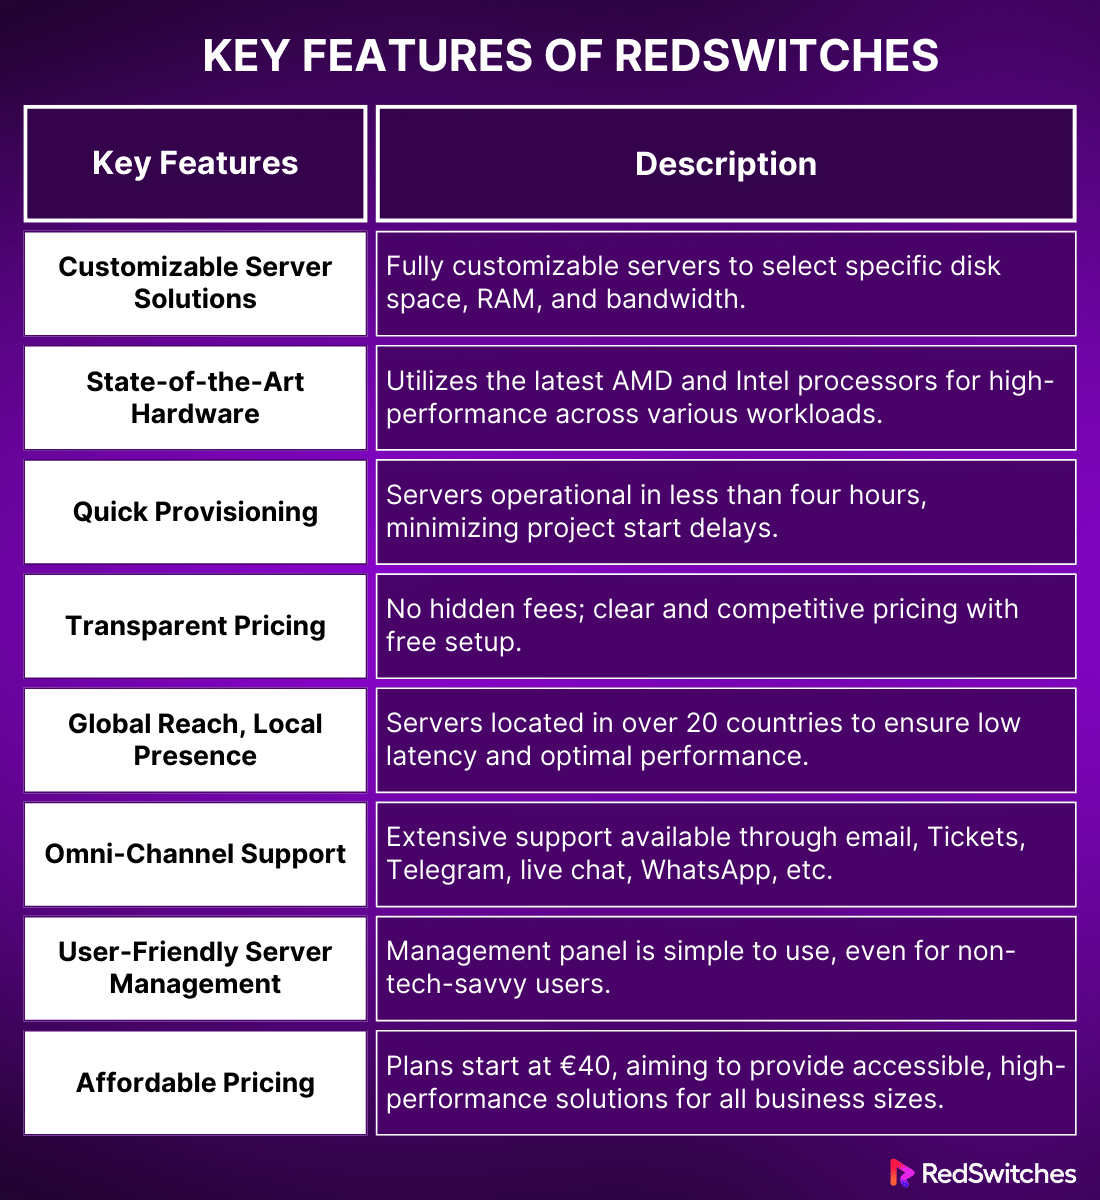 Key Features of RedSwitches